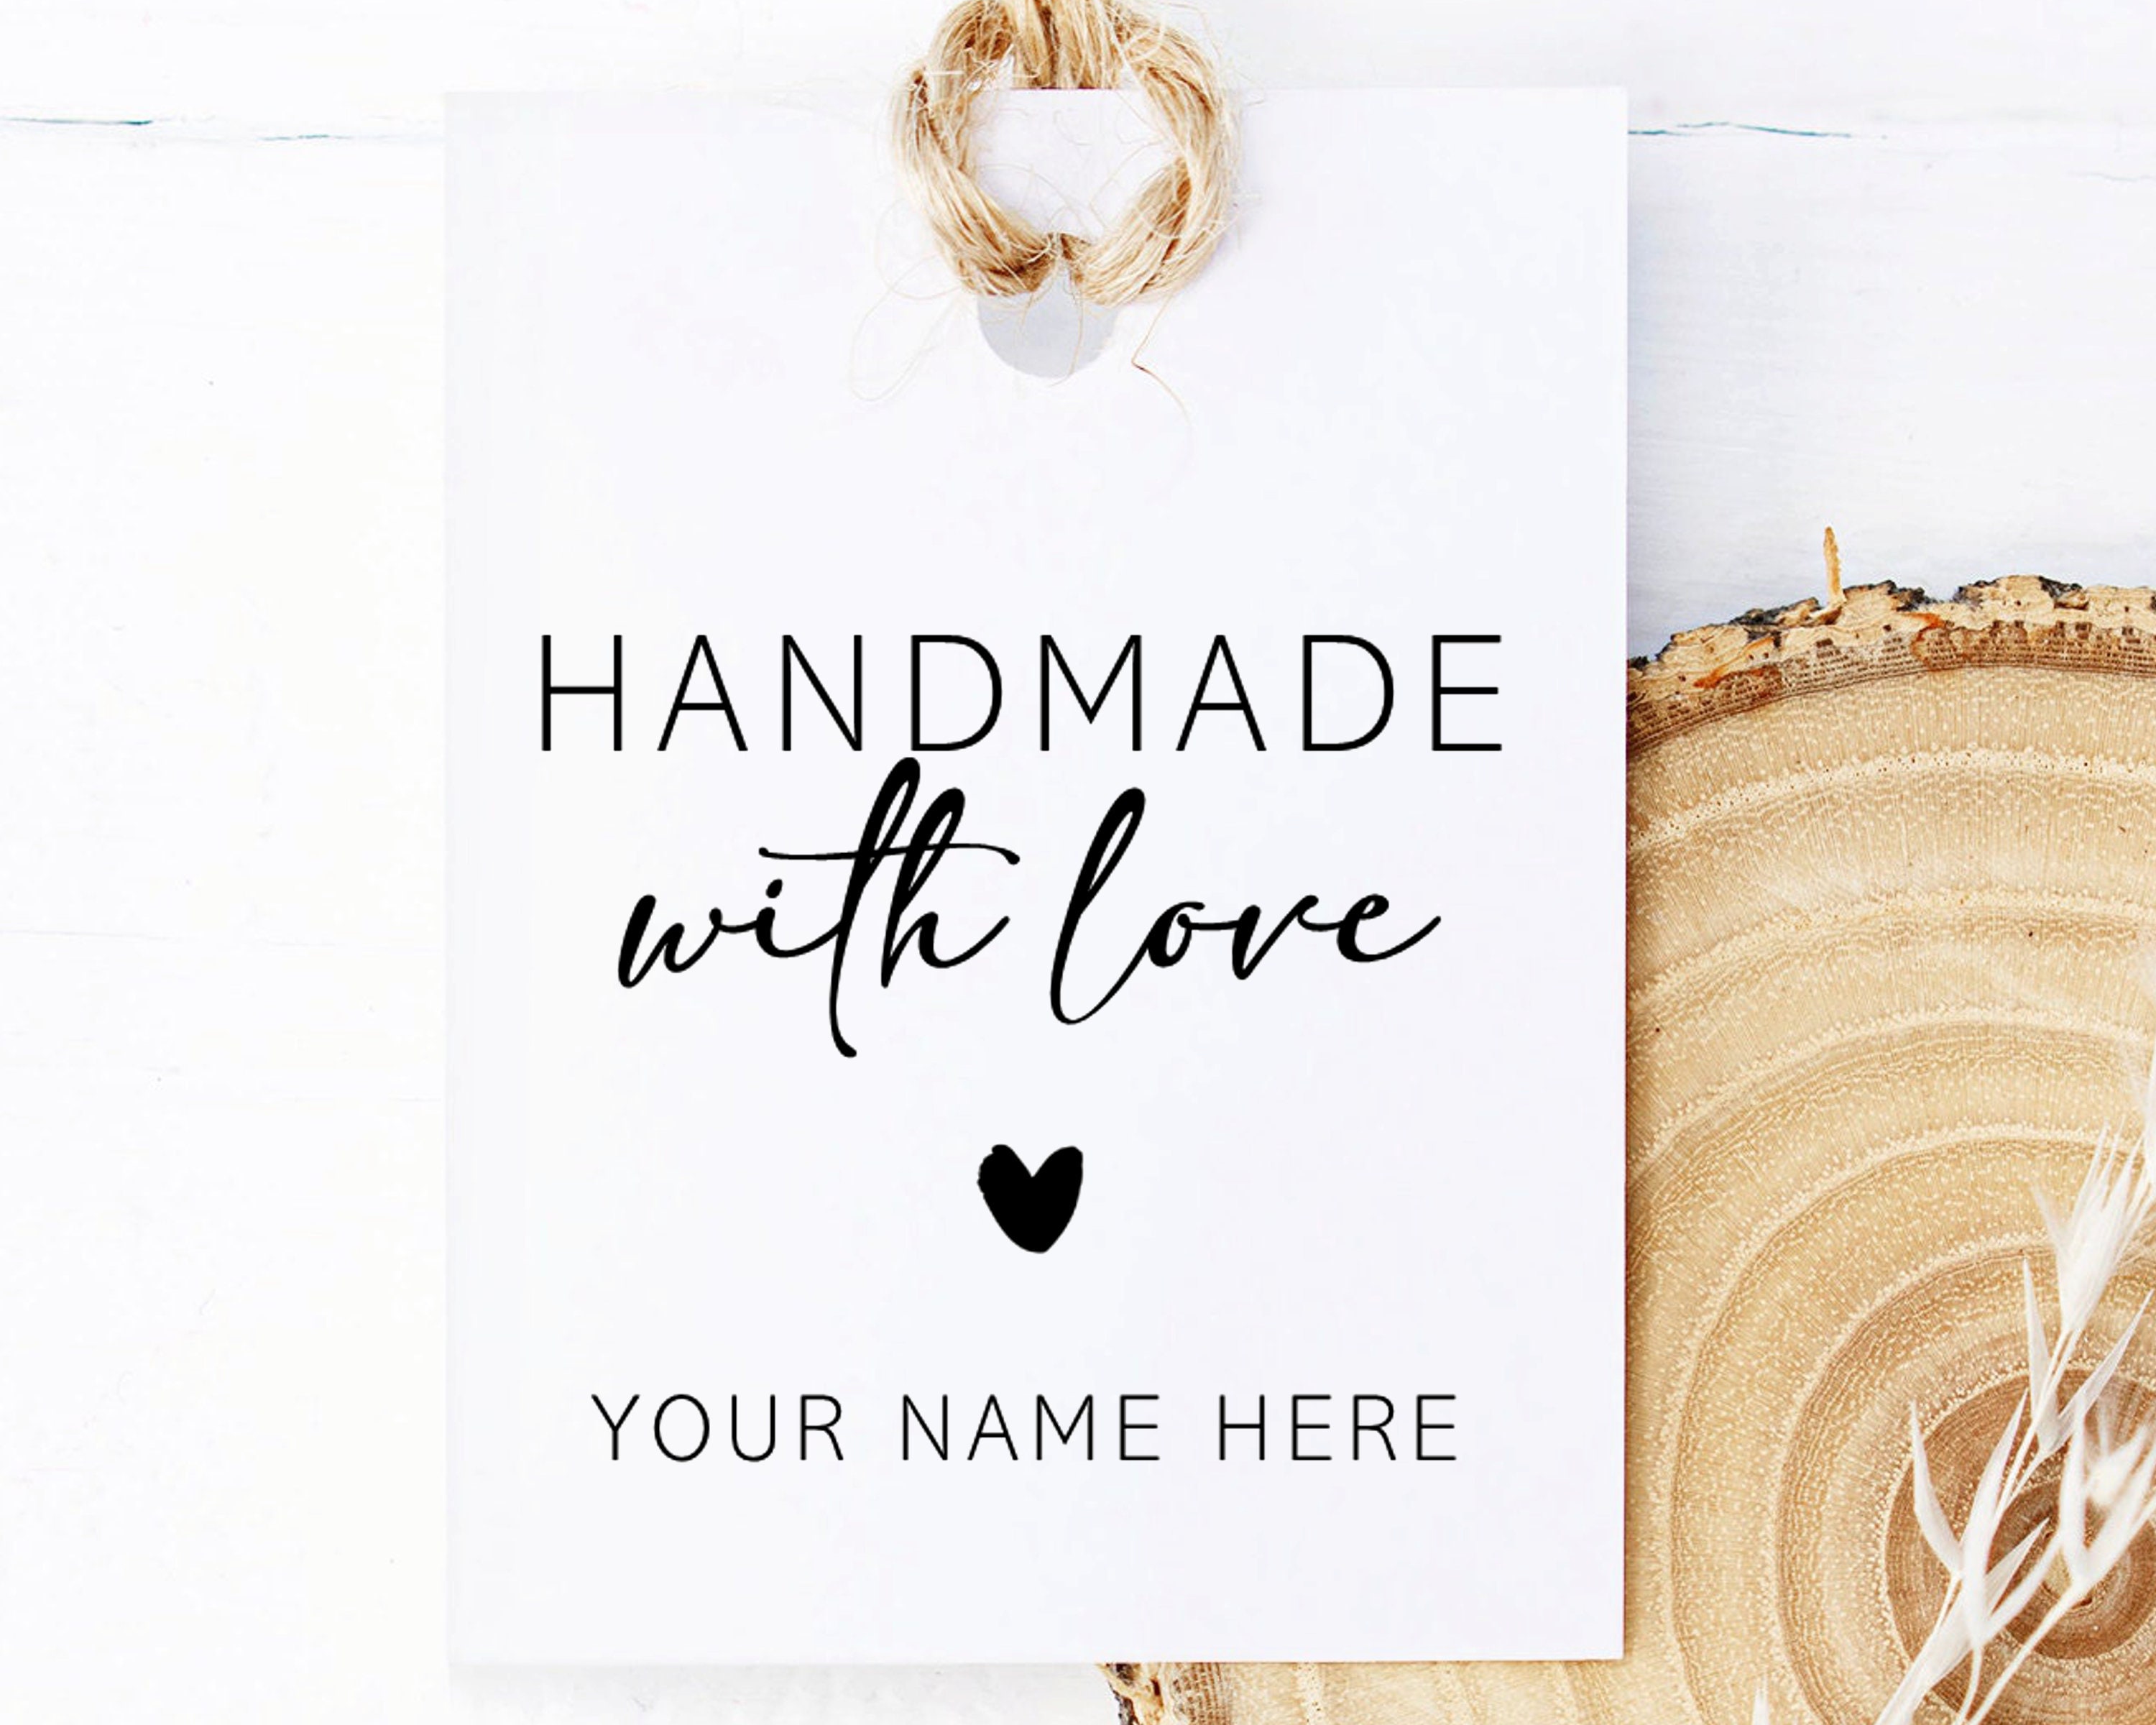 Handmade With Love Personalised Business Tags Tags for Small Handmade  Businesses Product Tags Product Labels Labels for Products 